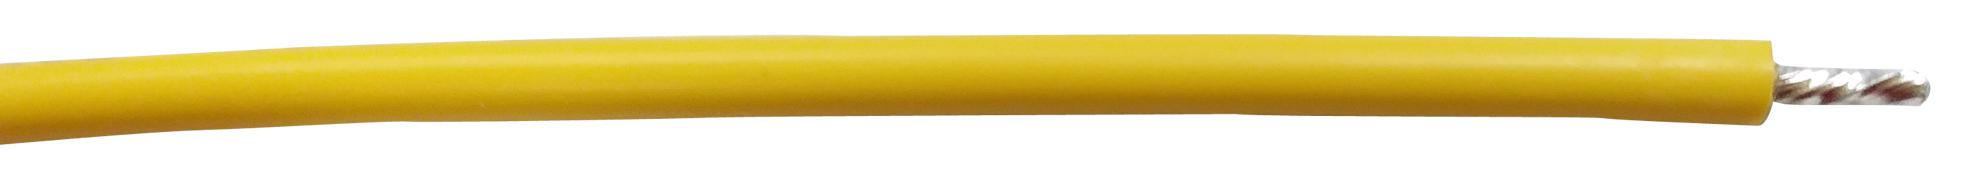 PP002409 HOOK-UP WIRE, 28AWG, YELLOW, 305M, 300V PRO POWER